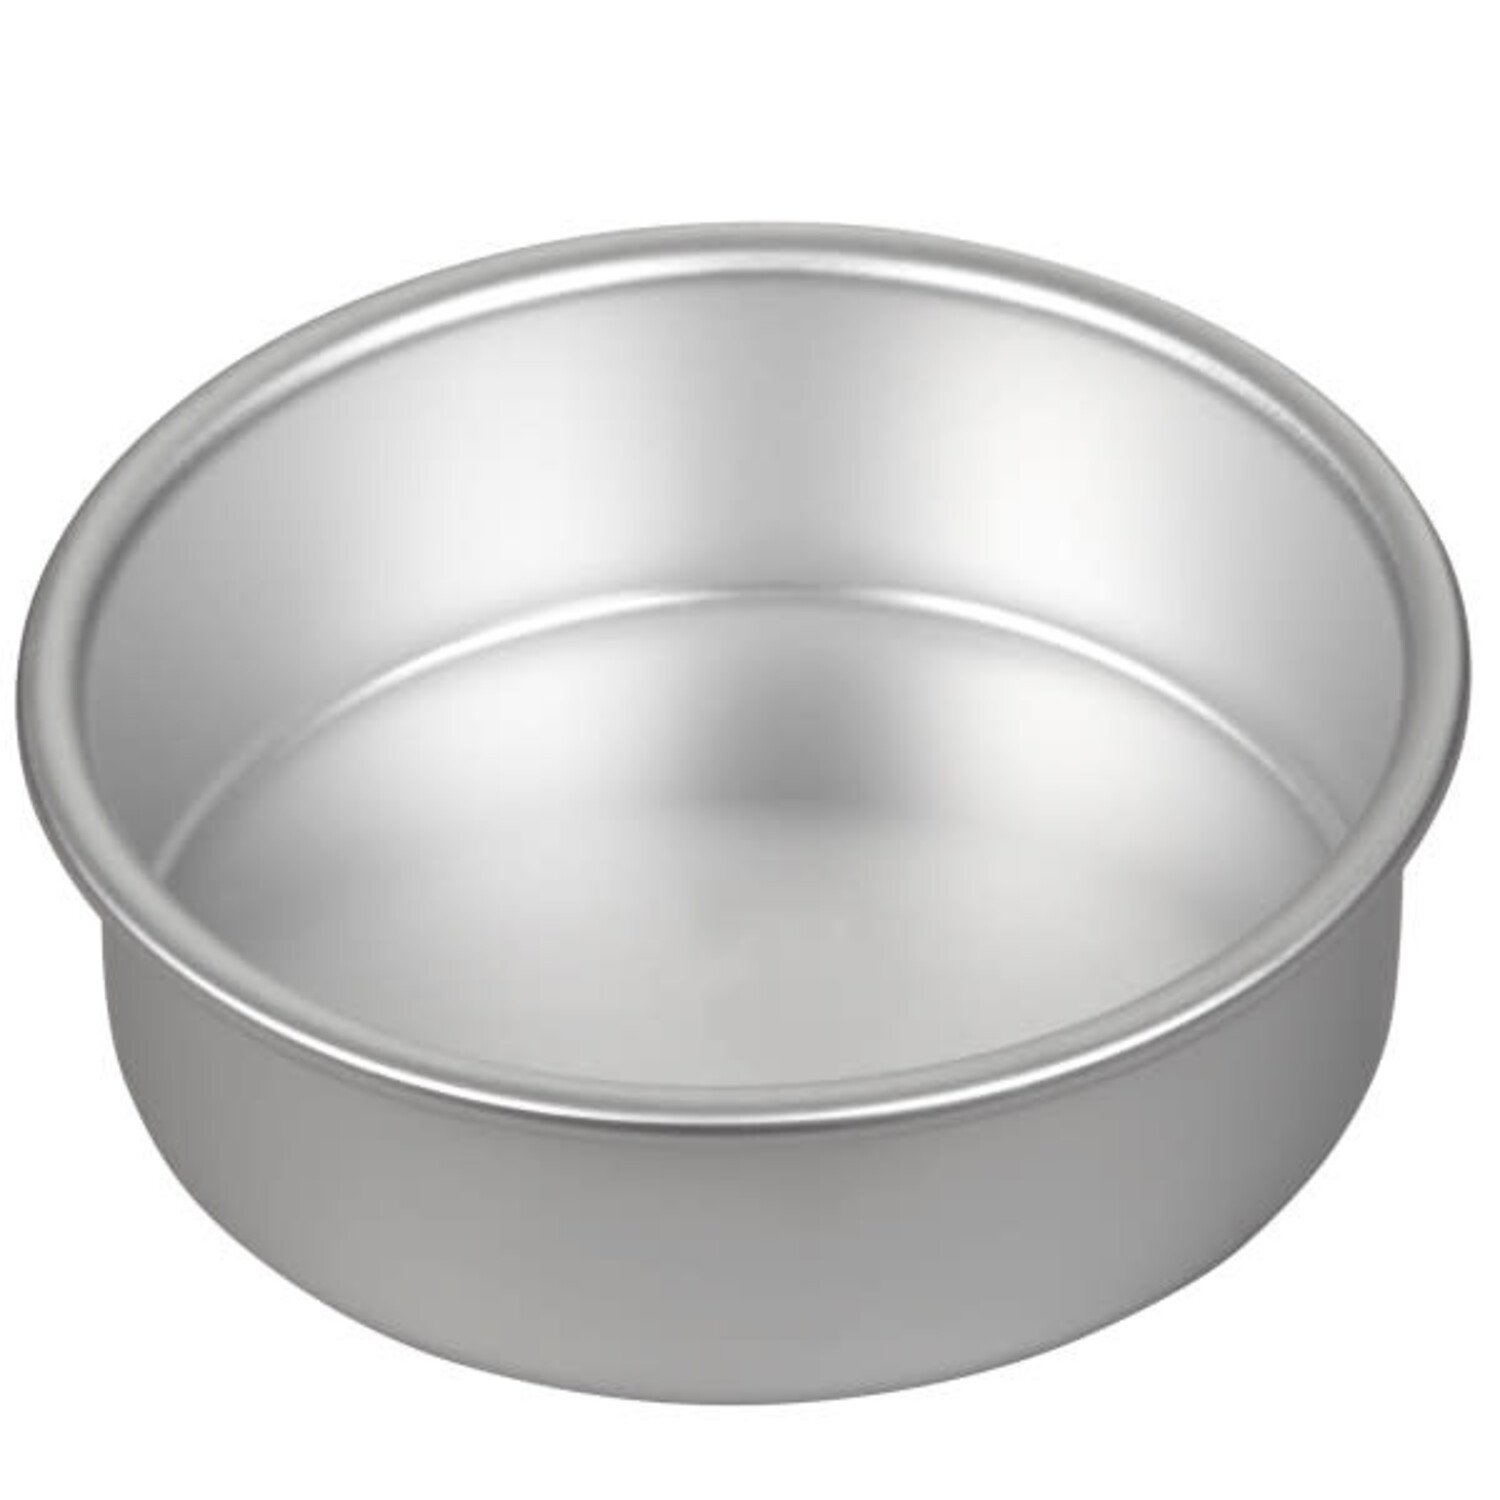 Wilton Stainless Steel Silver Cookie Scoop with Cookie Sheet and